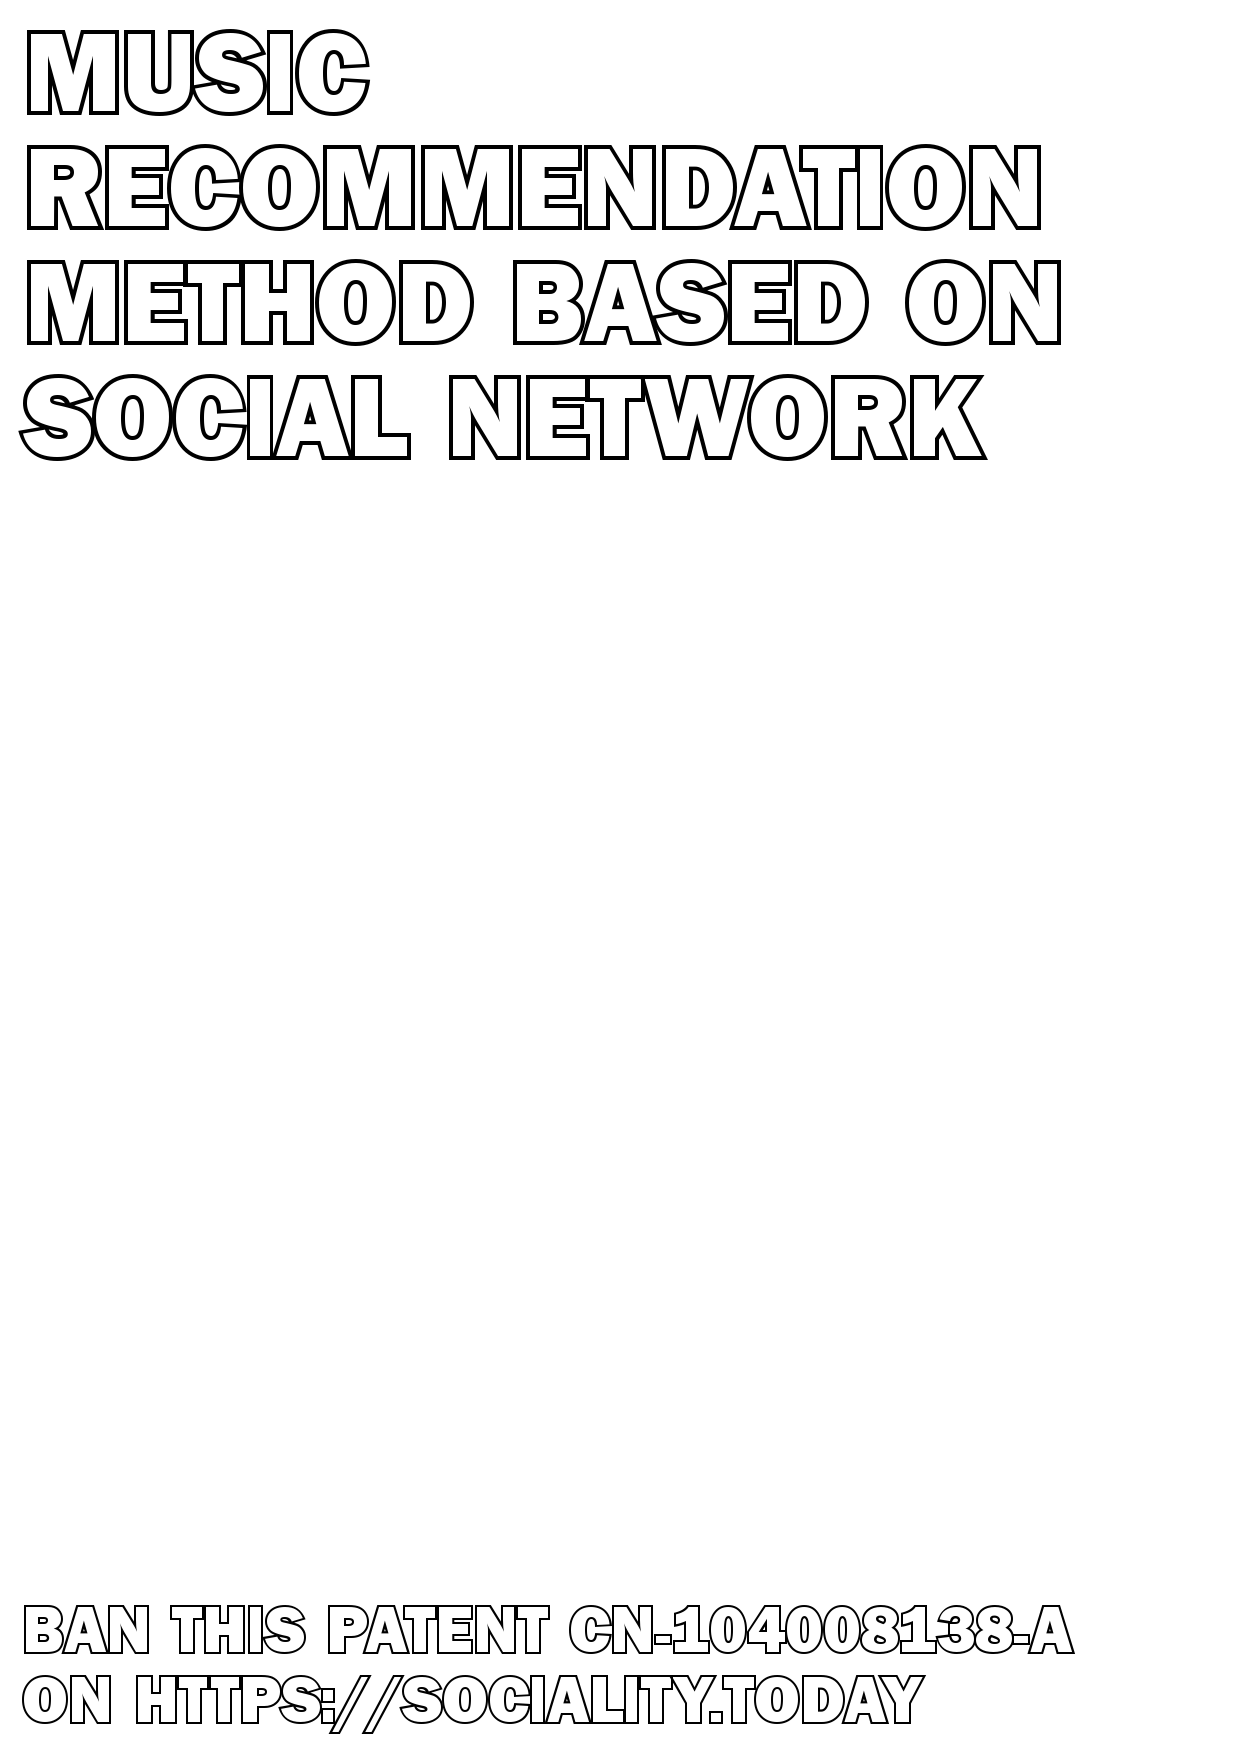 Music recommendation method based on social network  - CN-104008138-A